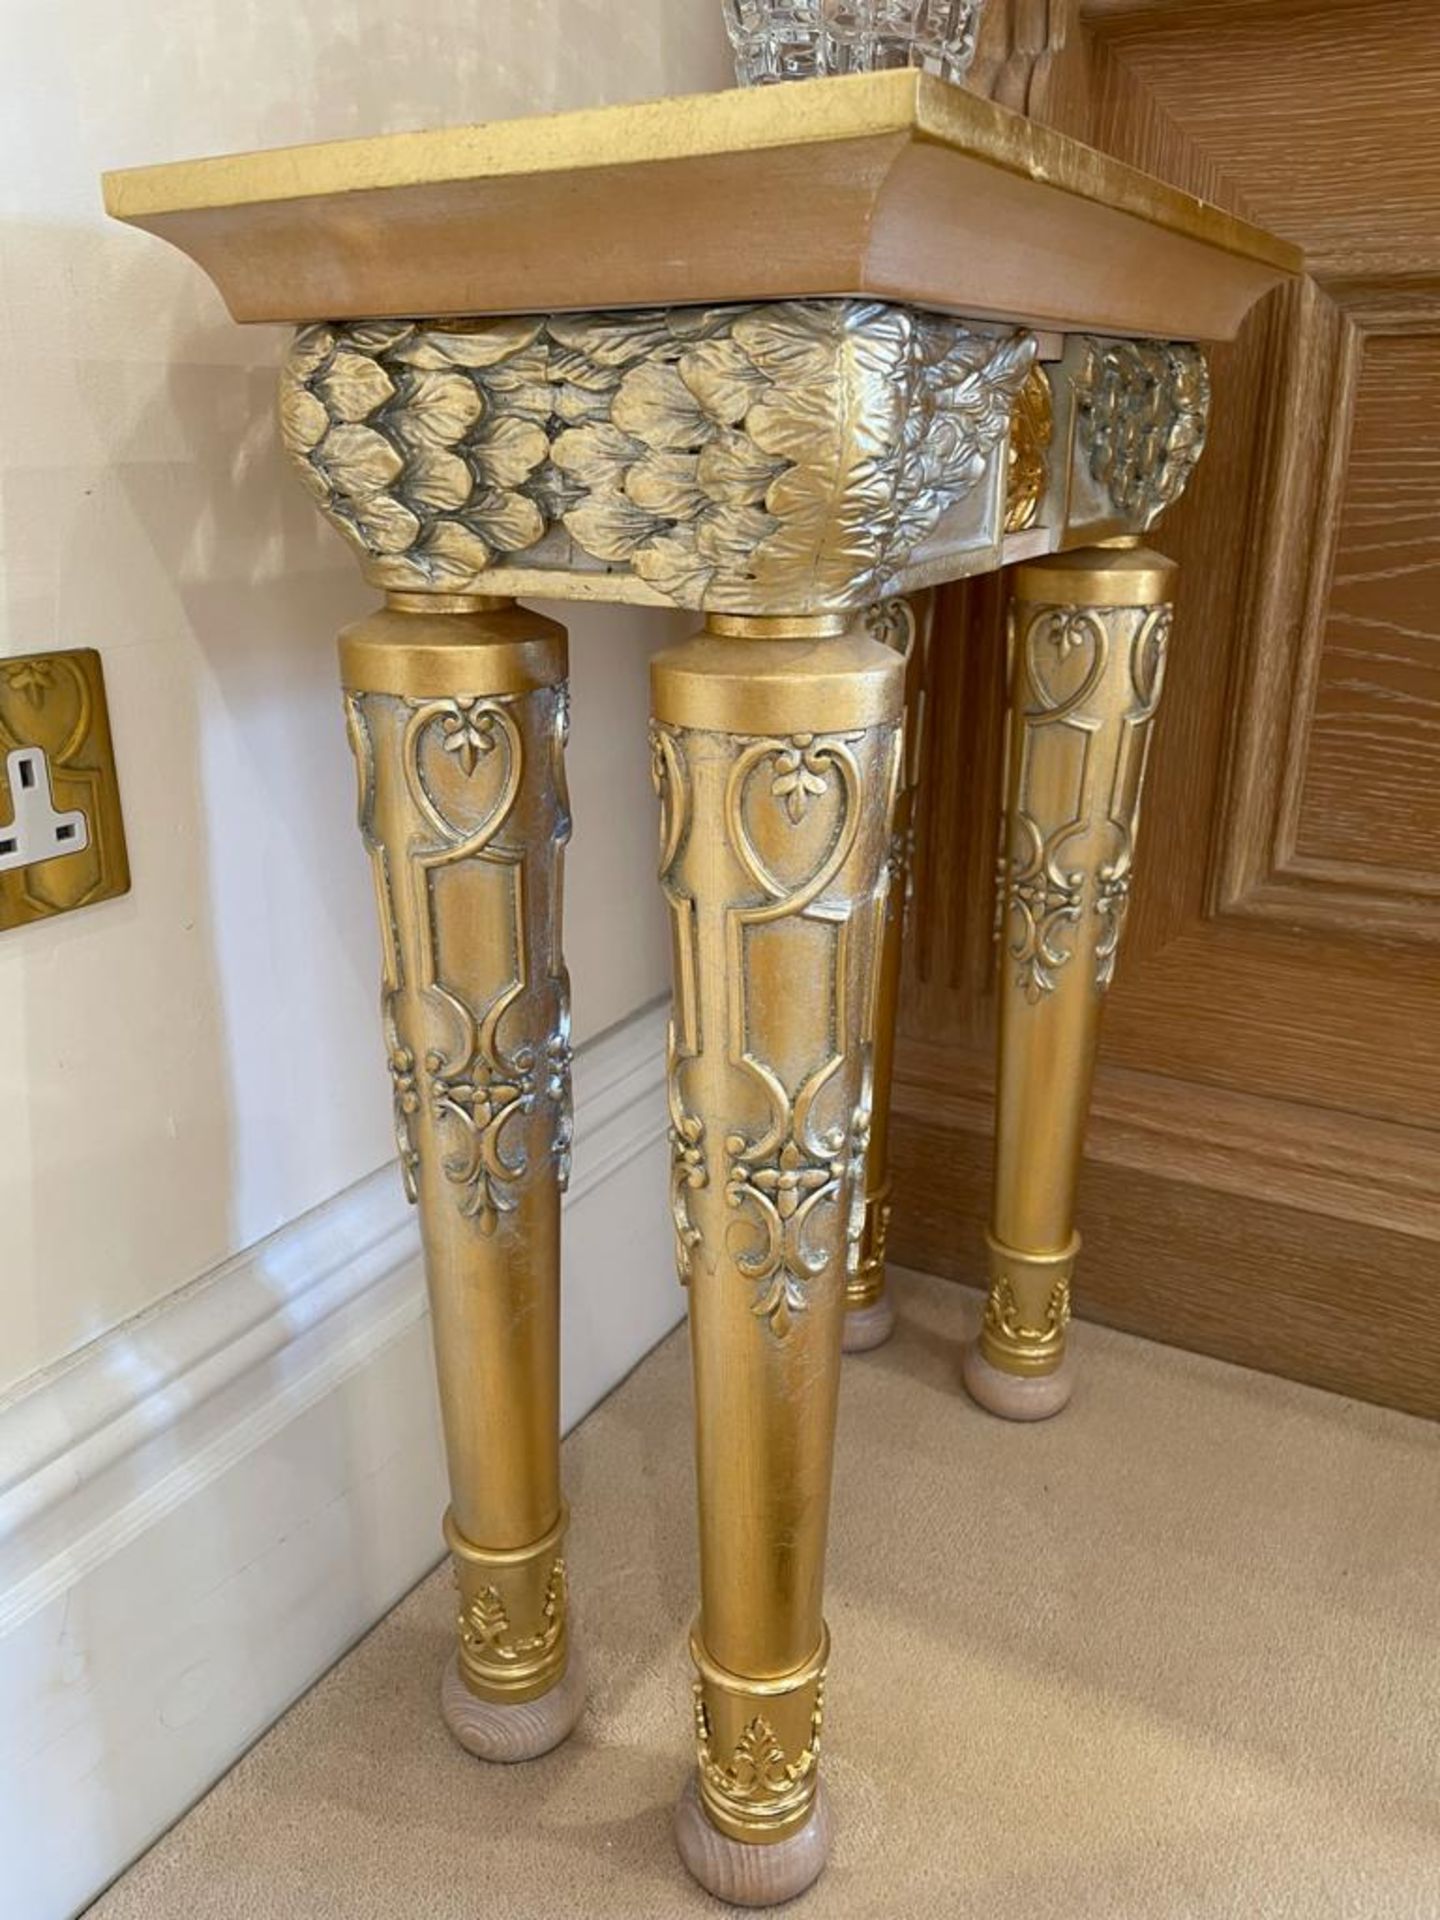 1 x Hand Carved Ornate Lamp Tables Complimented With Birchwood Veneer, Golden Pillar Legs, Carved - Image 7 of 10